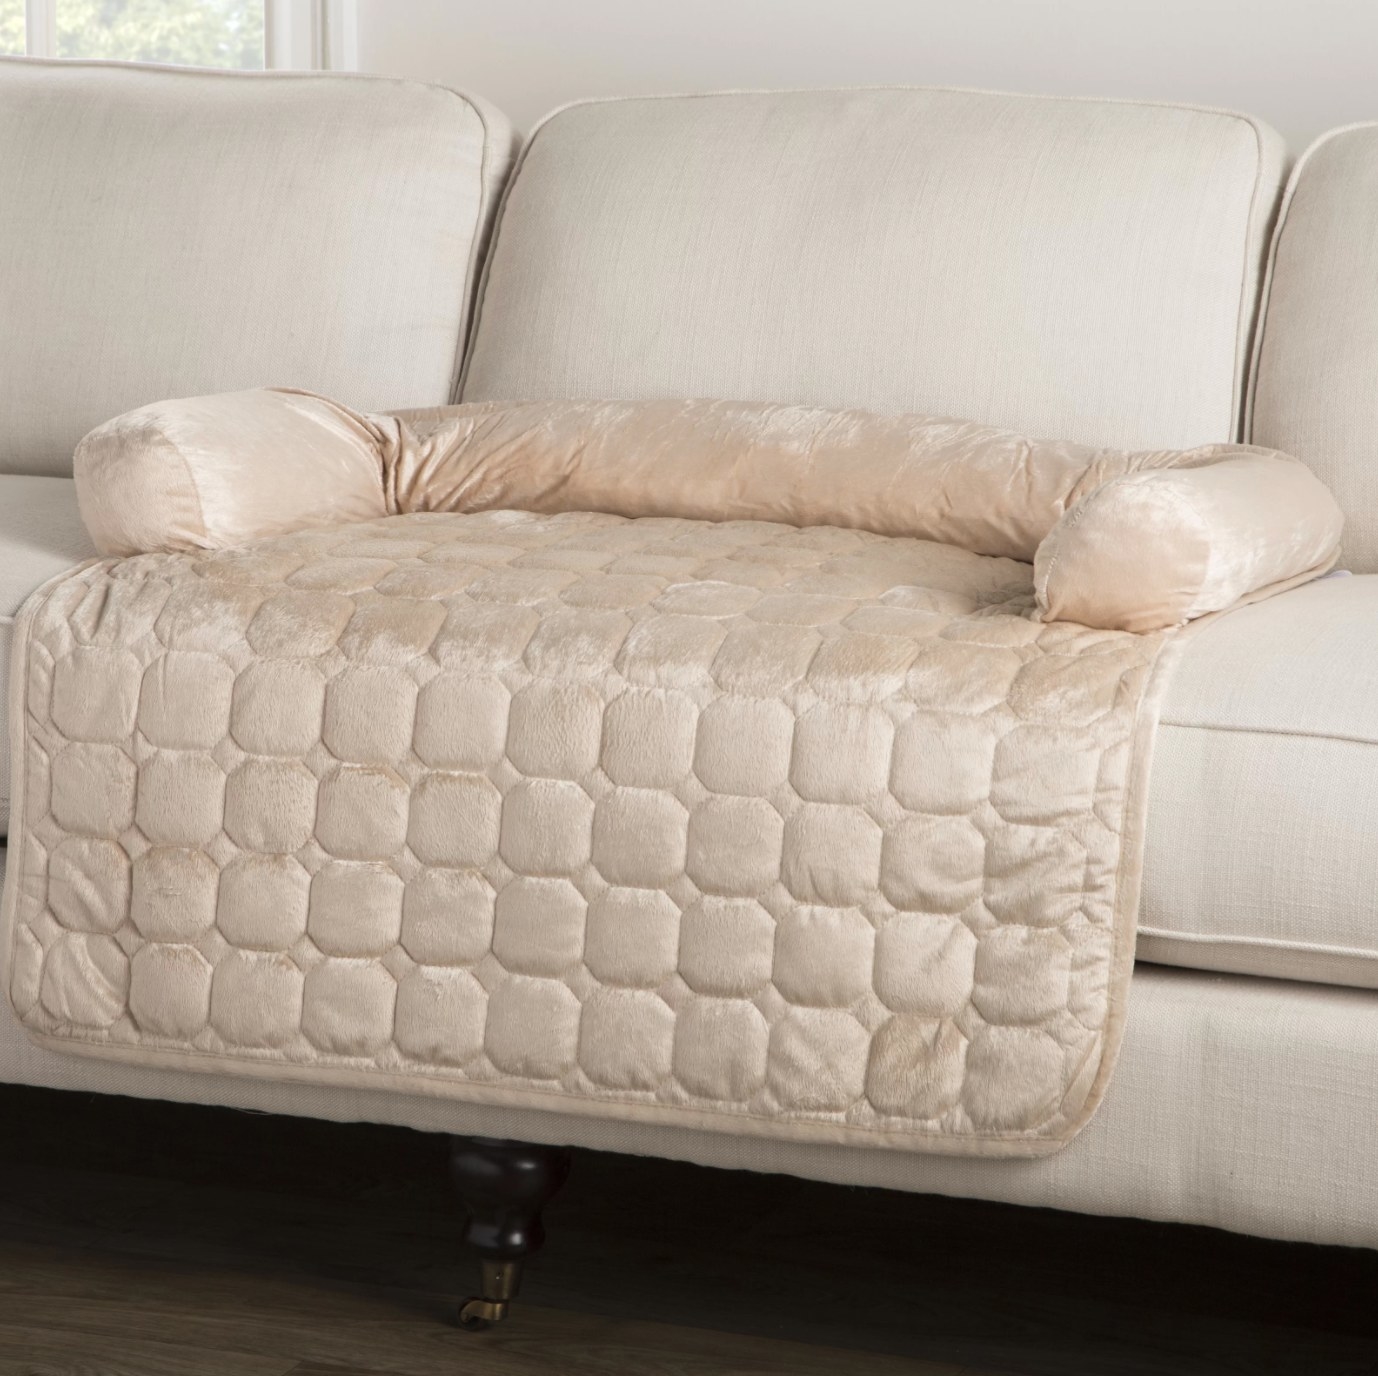 The furniture protector in beige on a white couch